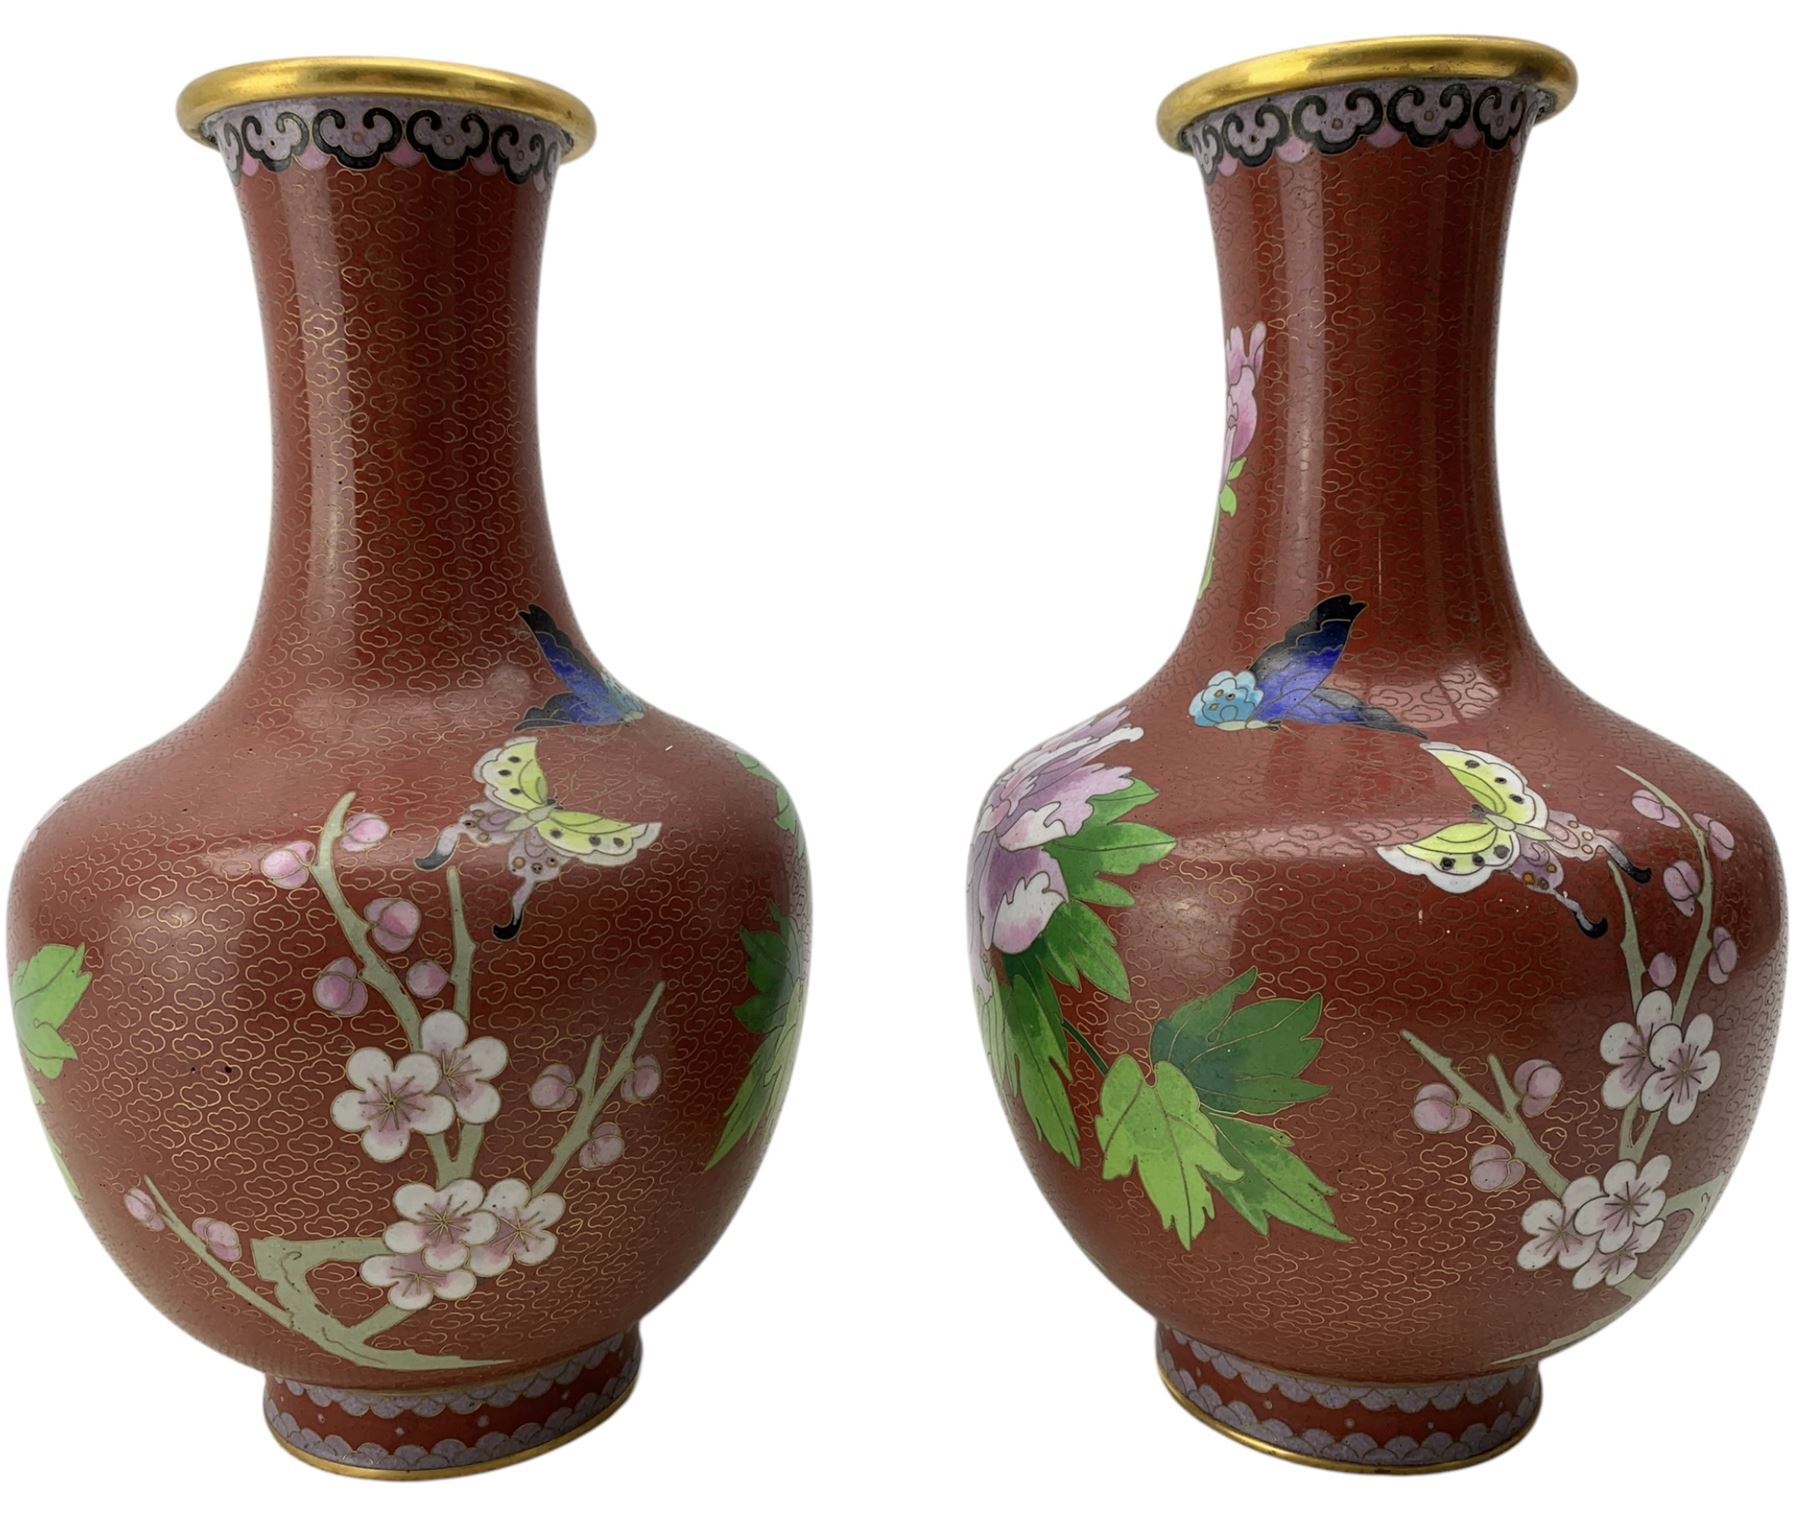 Pair of Japanese cloisonne vases - Image 2 of 2